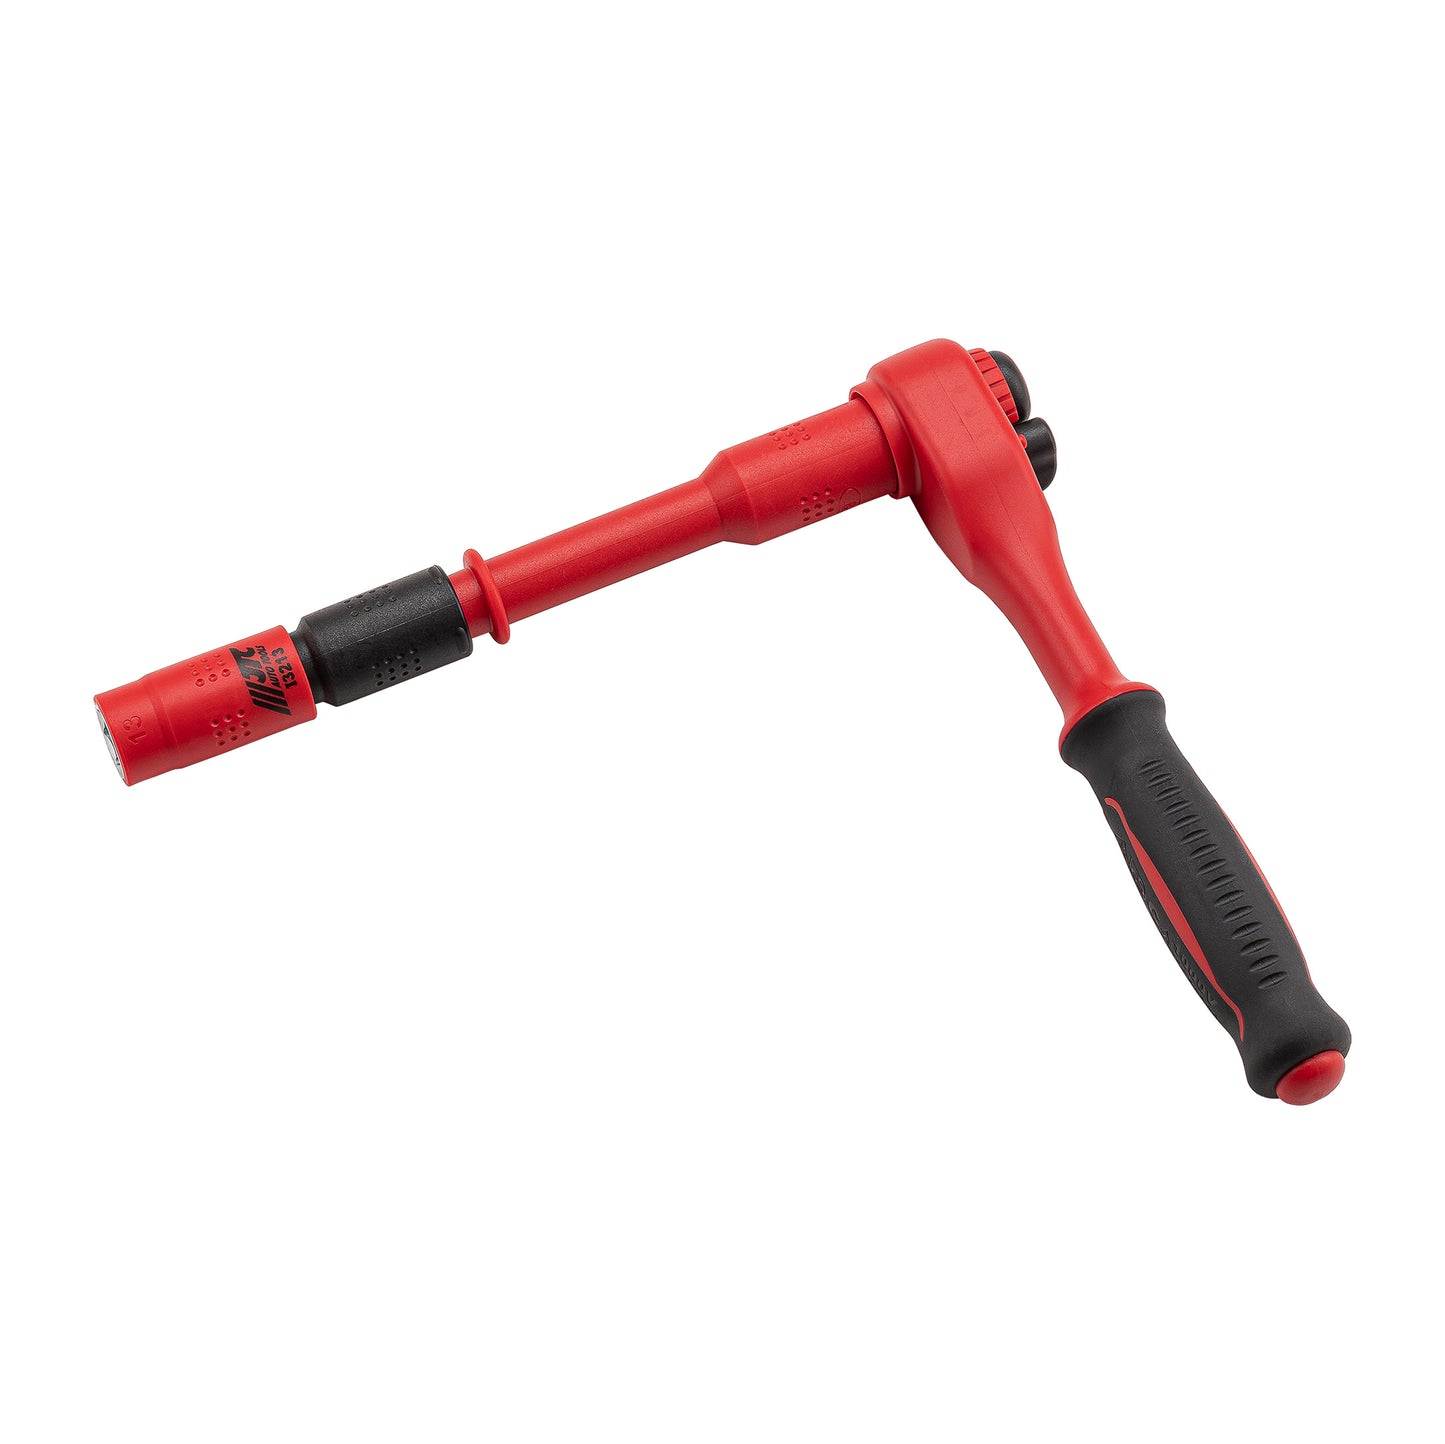 PYRO 13MM RATCHET AND SOCKET